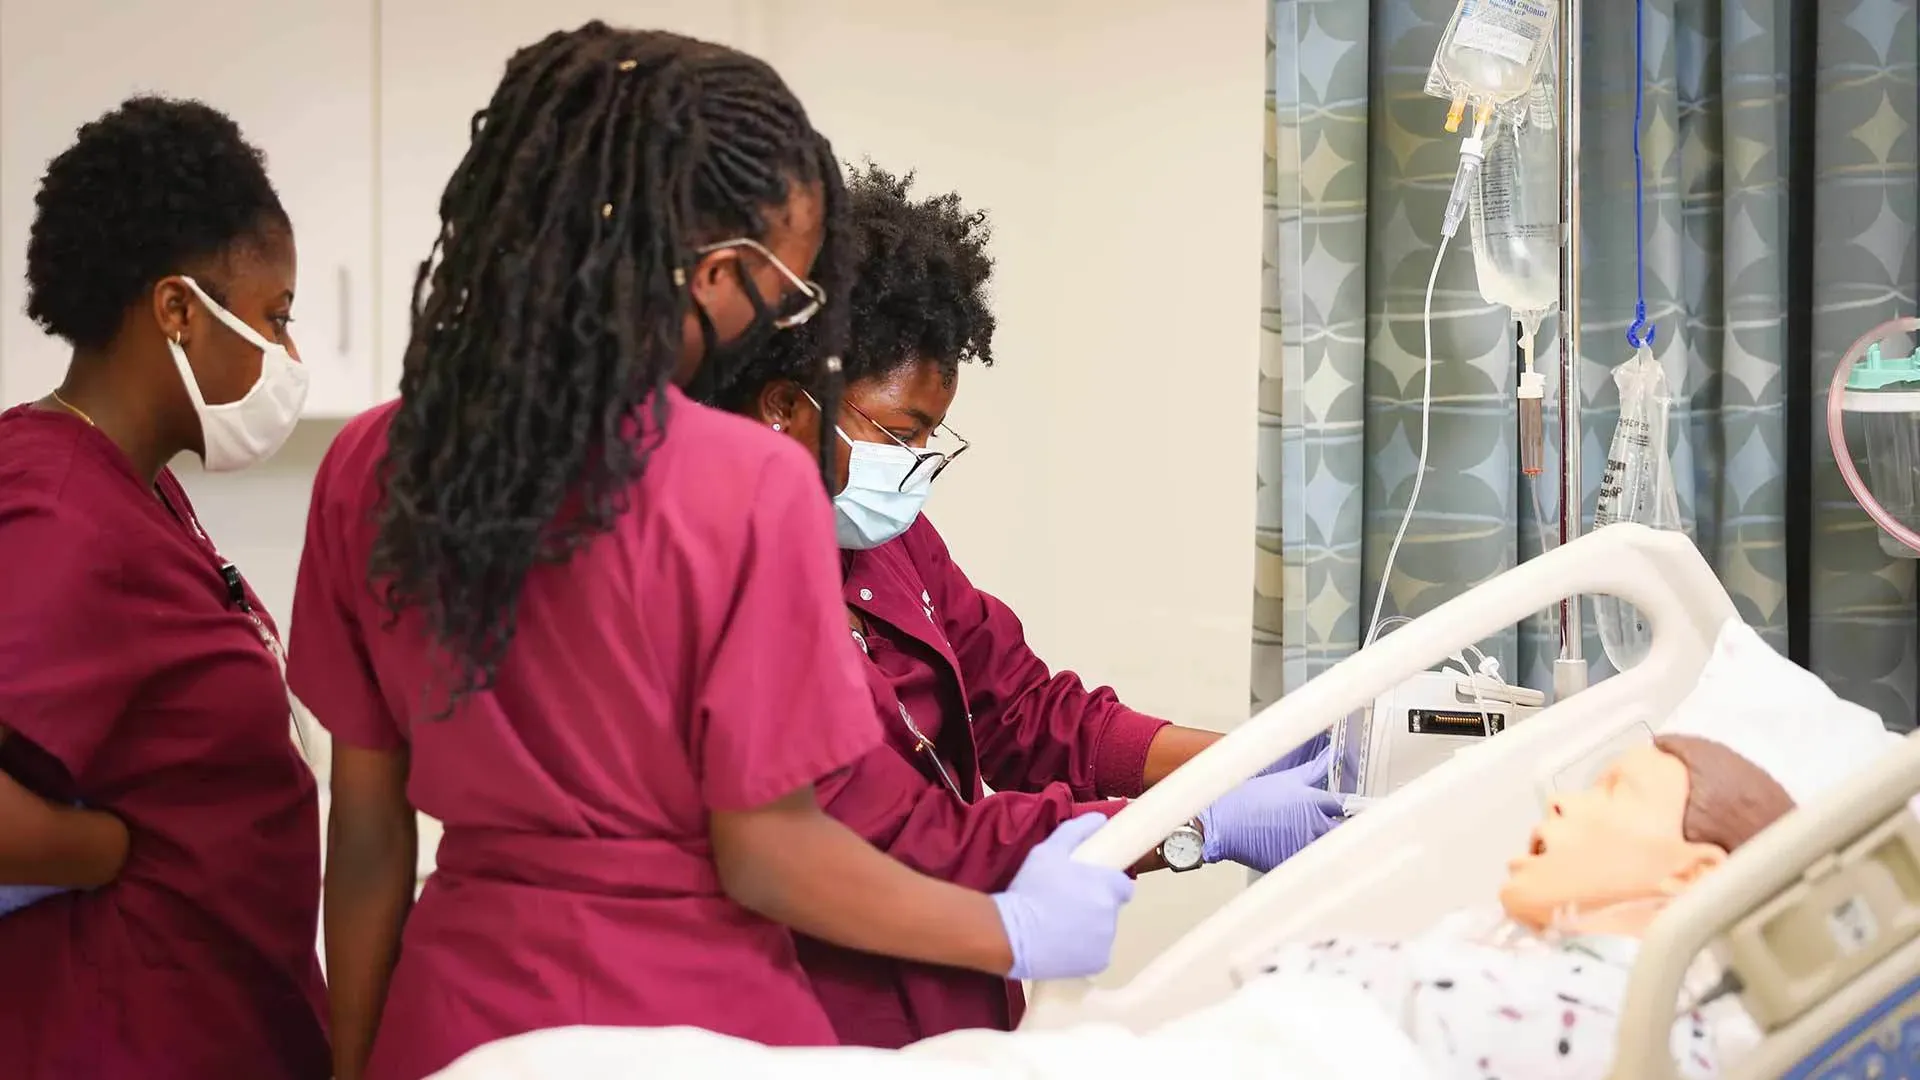 Nursing students getting hands-on experience at a cost-effective private university in Nigeria